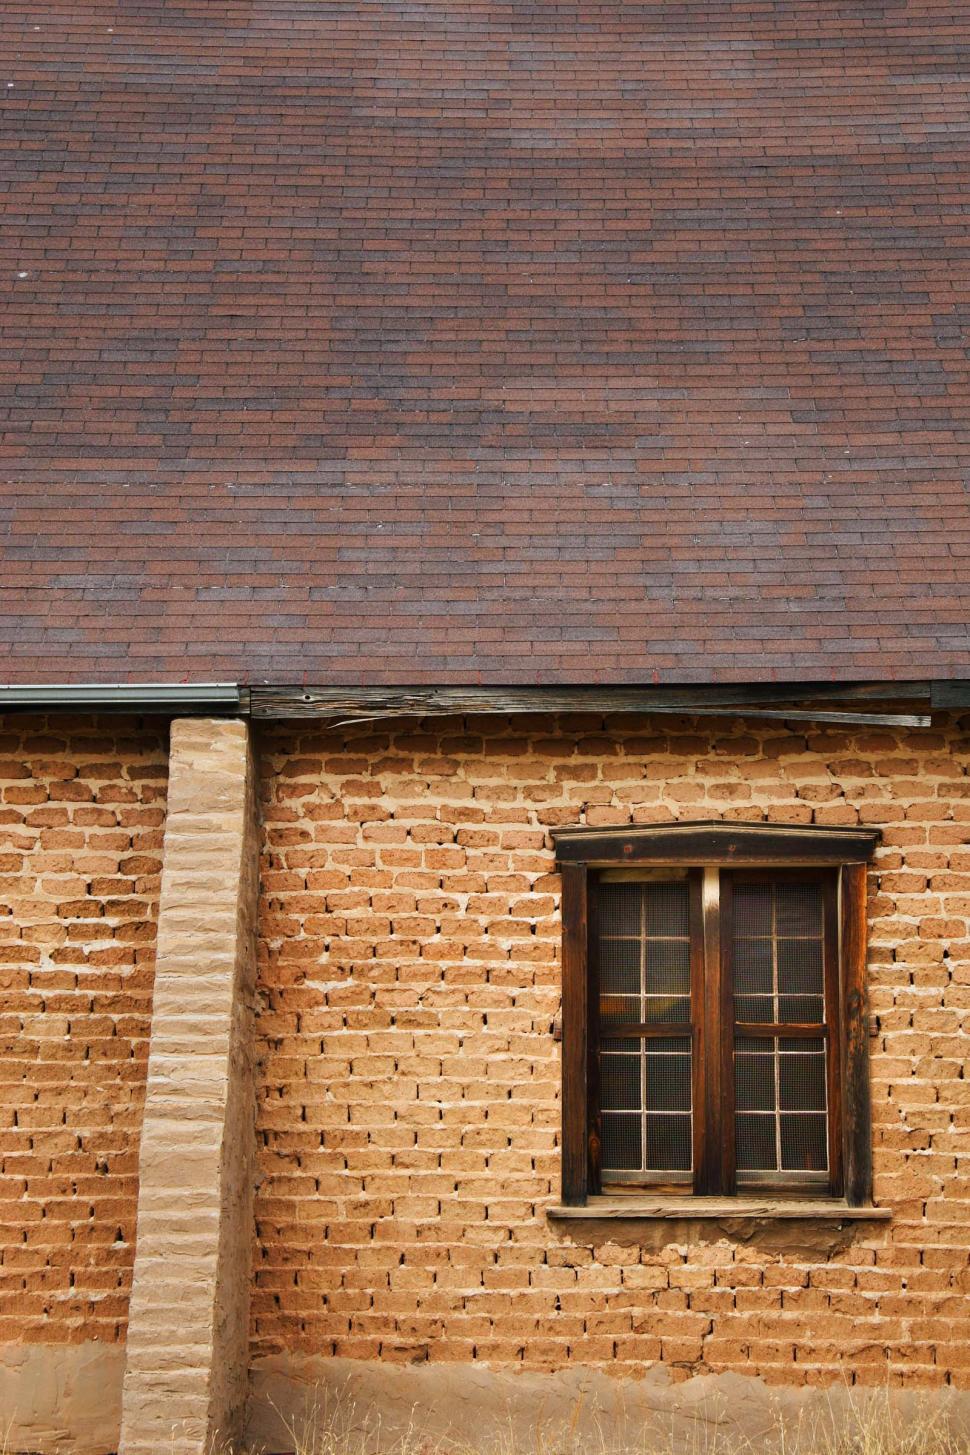 Free Image of Brick Wall With Wooden Window 